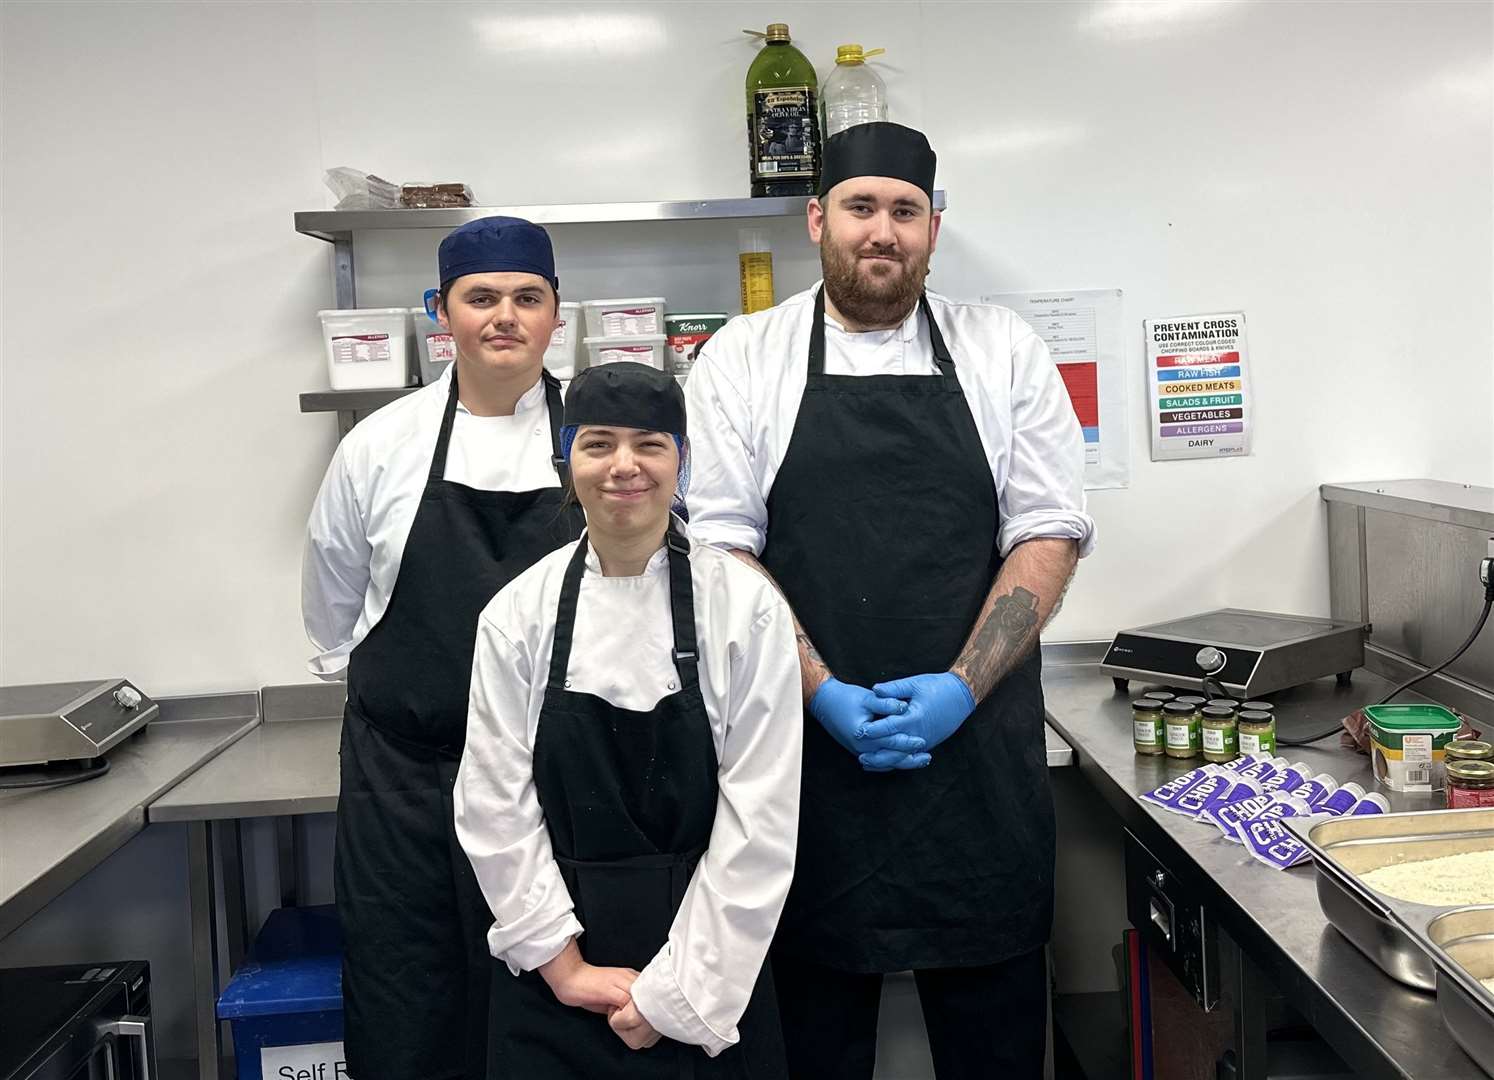 Professional Cookery students (front) Maria Ahmadulina and (back from left) Max McKeever and James Durning getting ready to prepare the next batch of Food for Families meals.